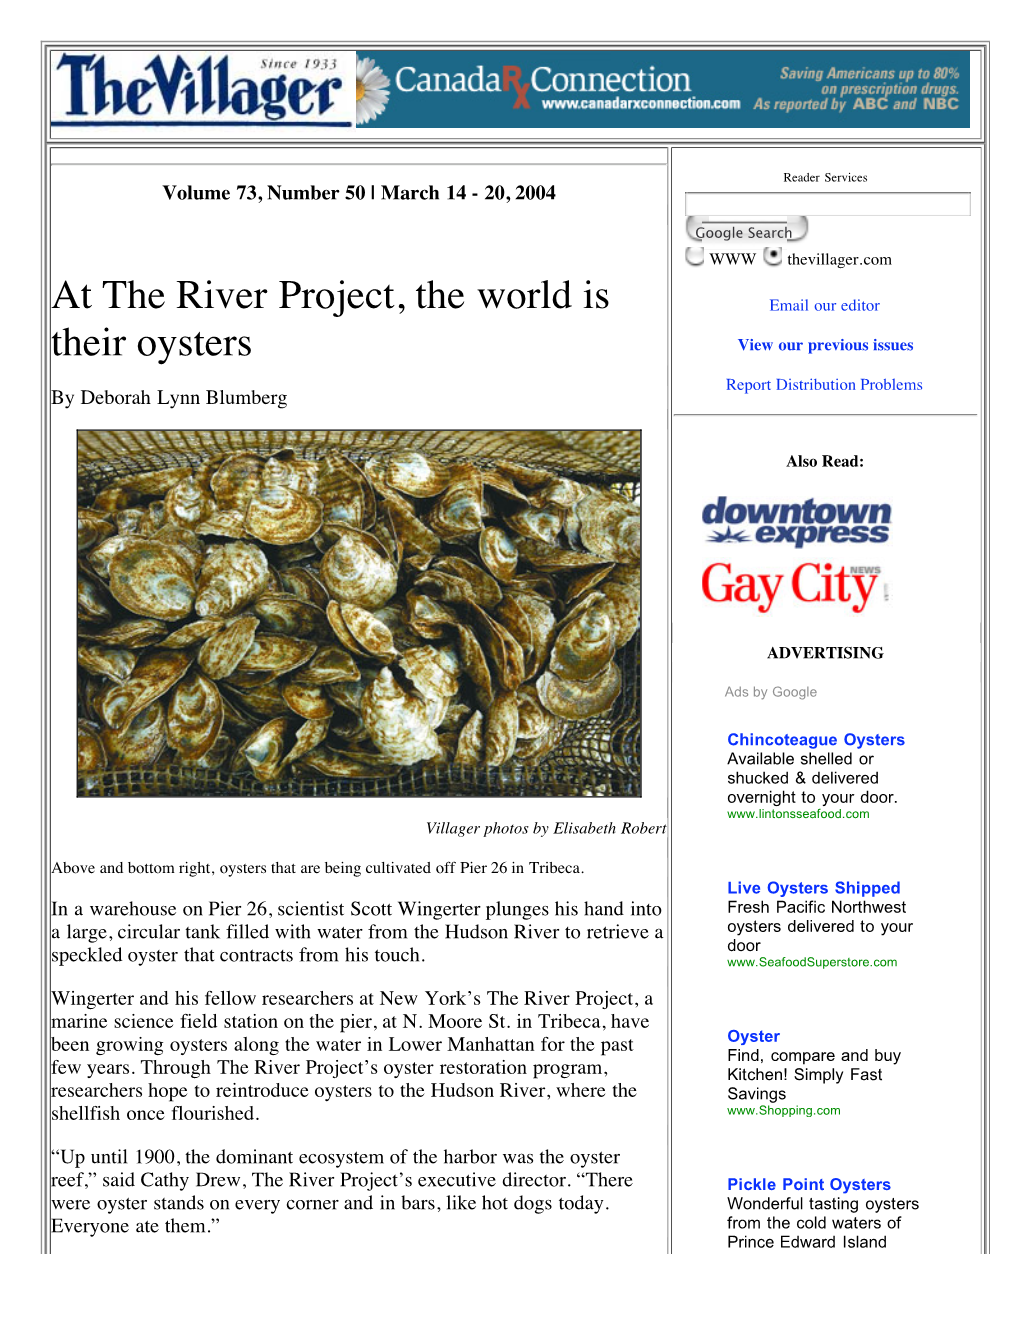 At the River Project, the World Is Their Oysters